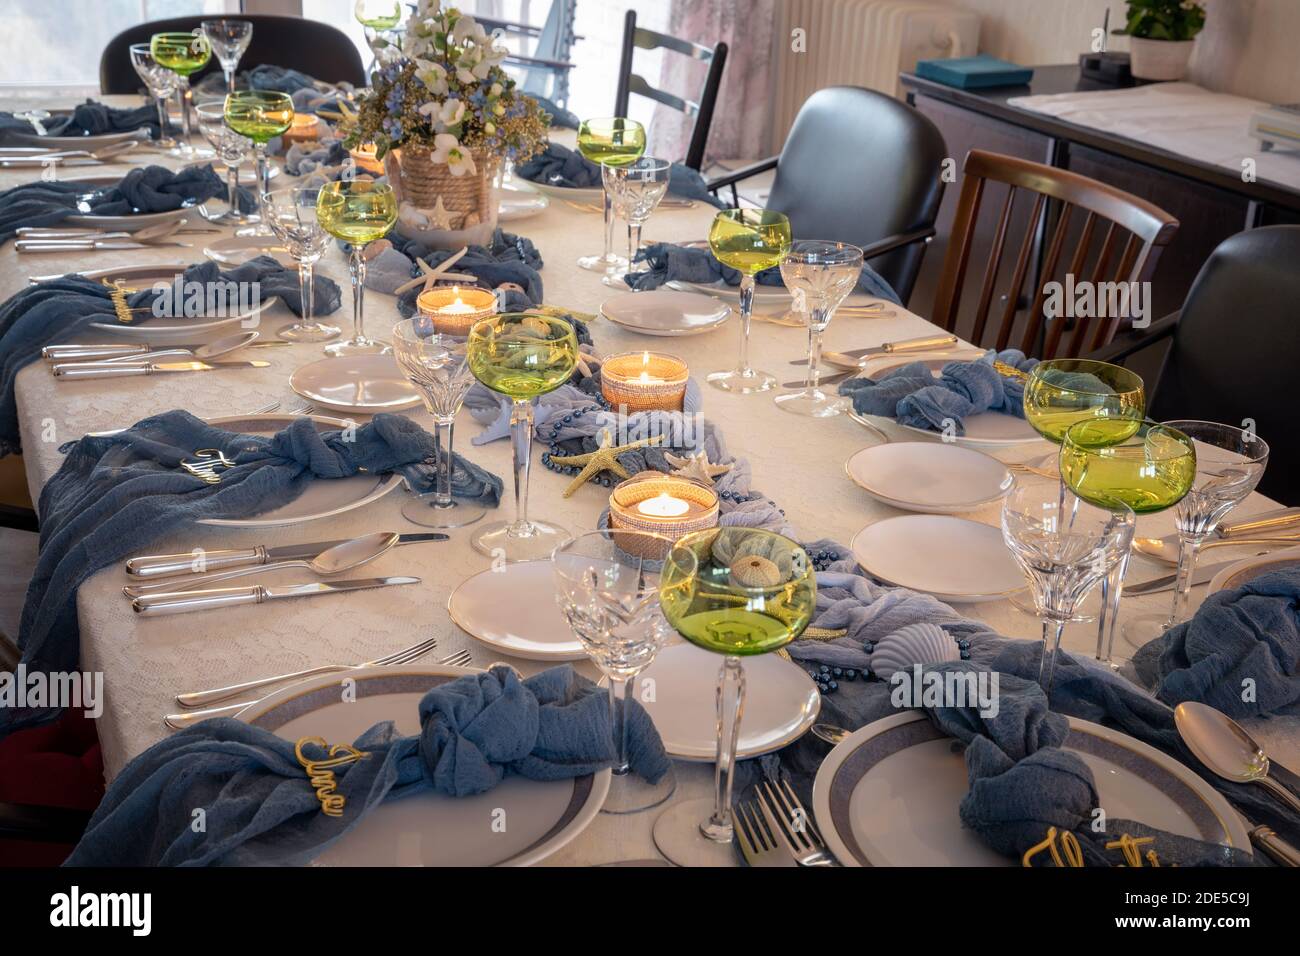 Christmas dinner table decorations in blues and gold following a